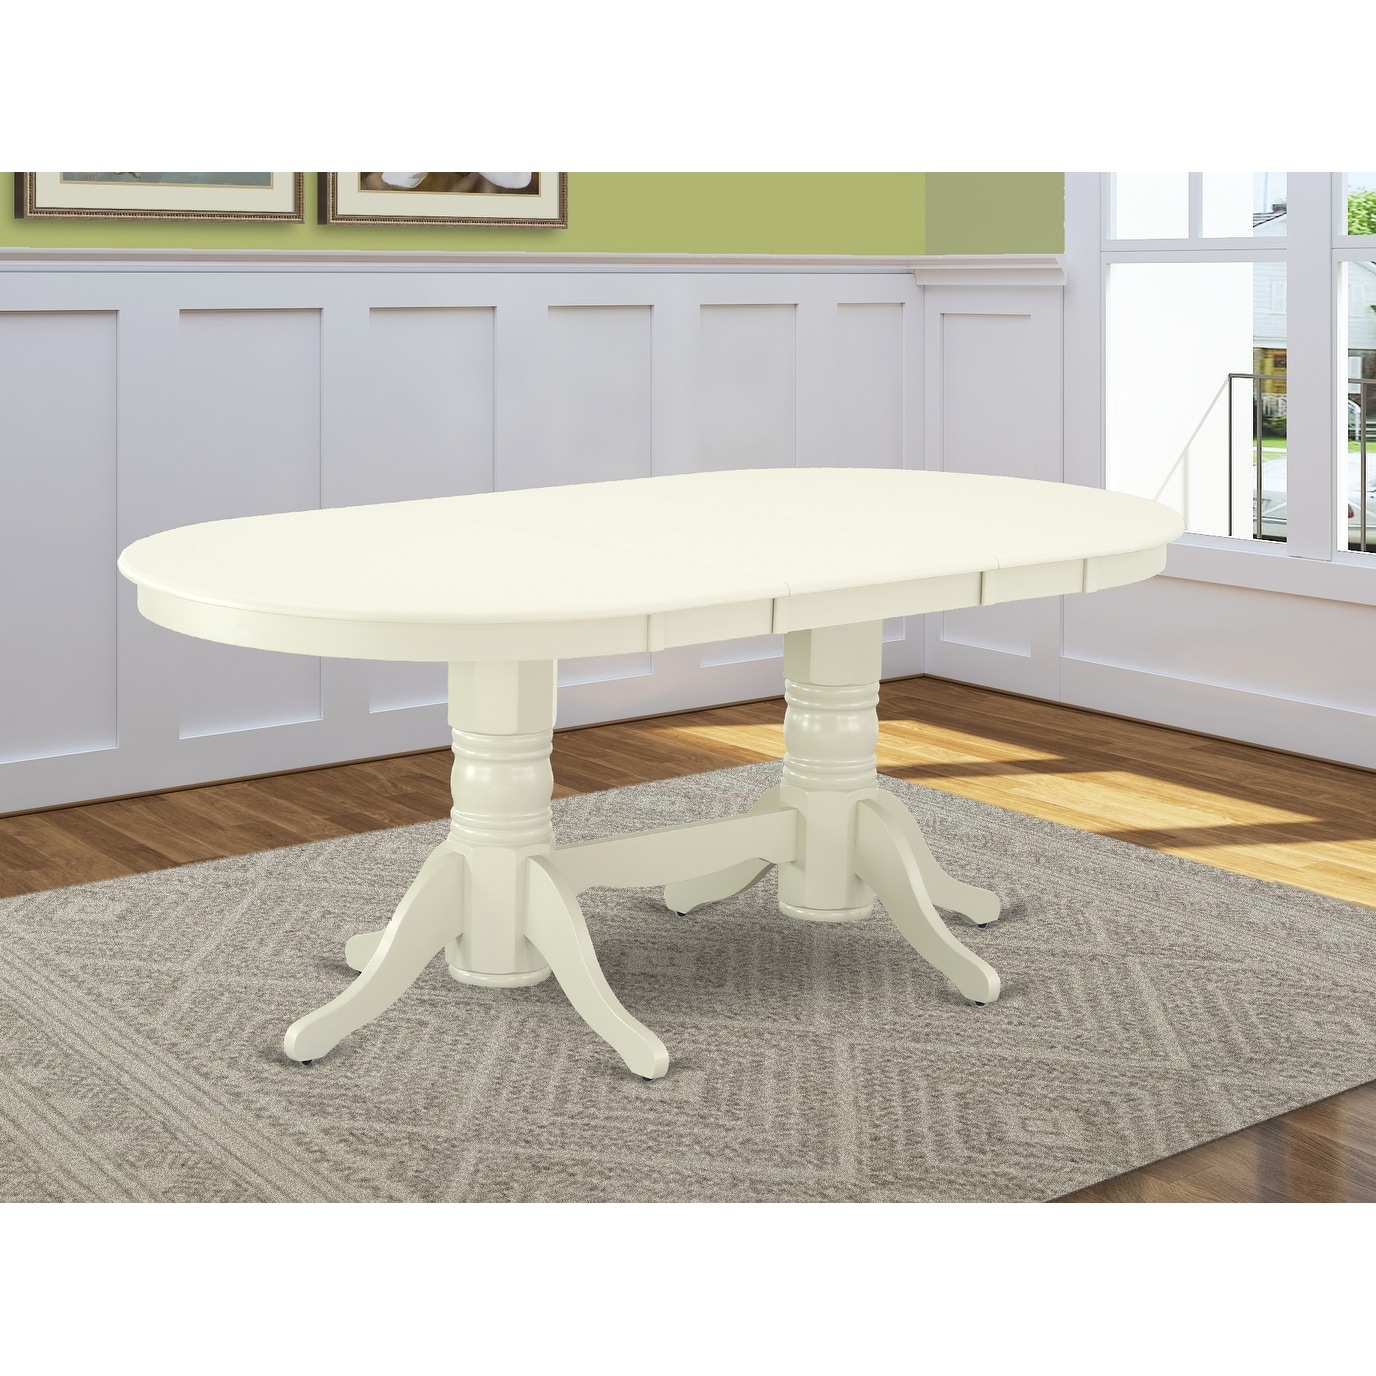 Vat Lwh Tp Vancouver Double Pedestal Dining Table With 17 Butterfly Leaf In Linen White Finish Off White Overstock 28181019